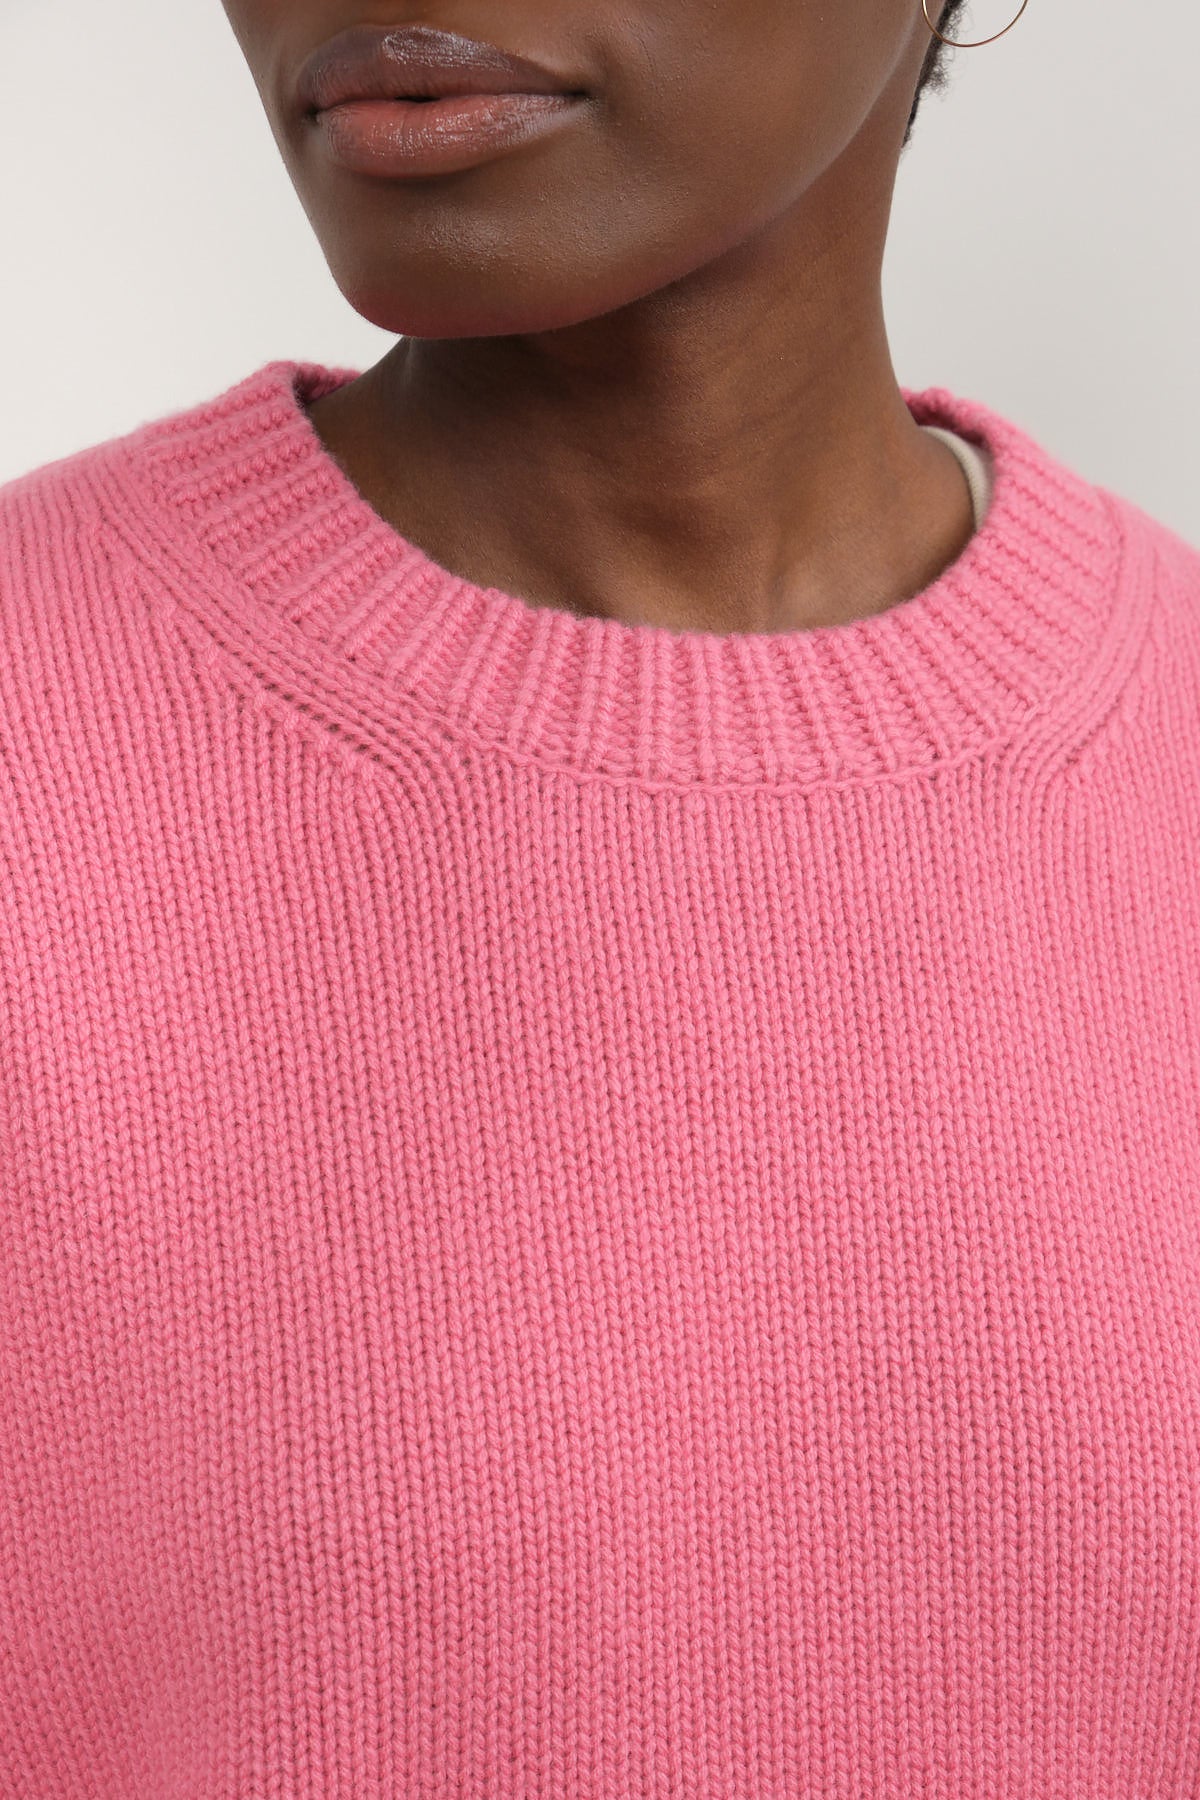 women's cashmere sweater from allude